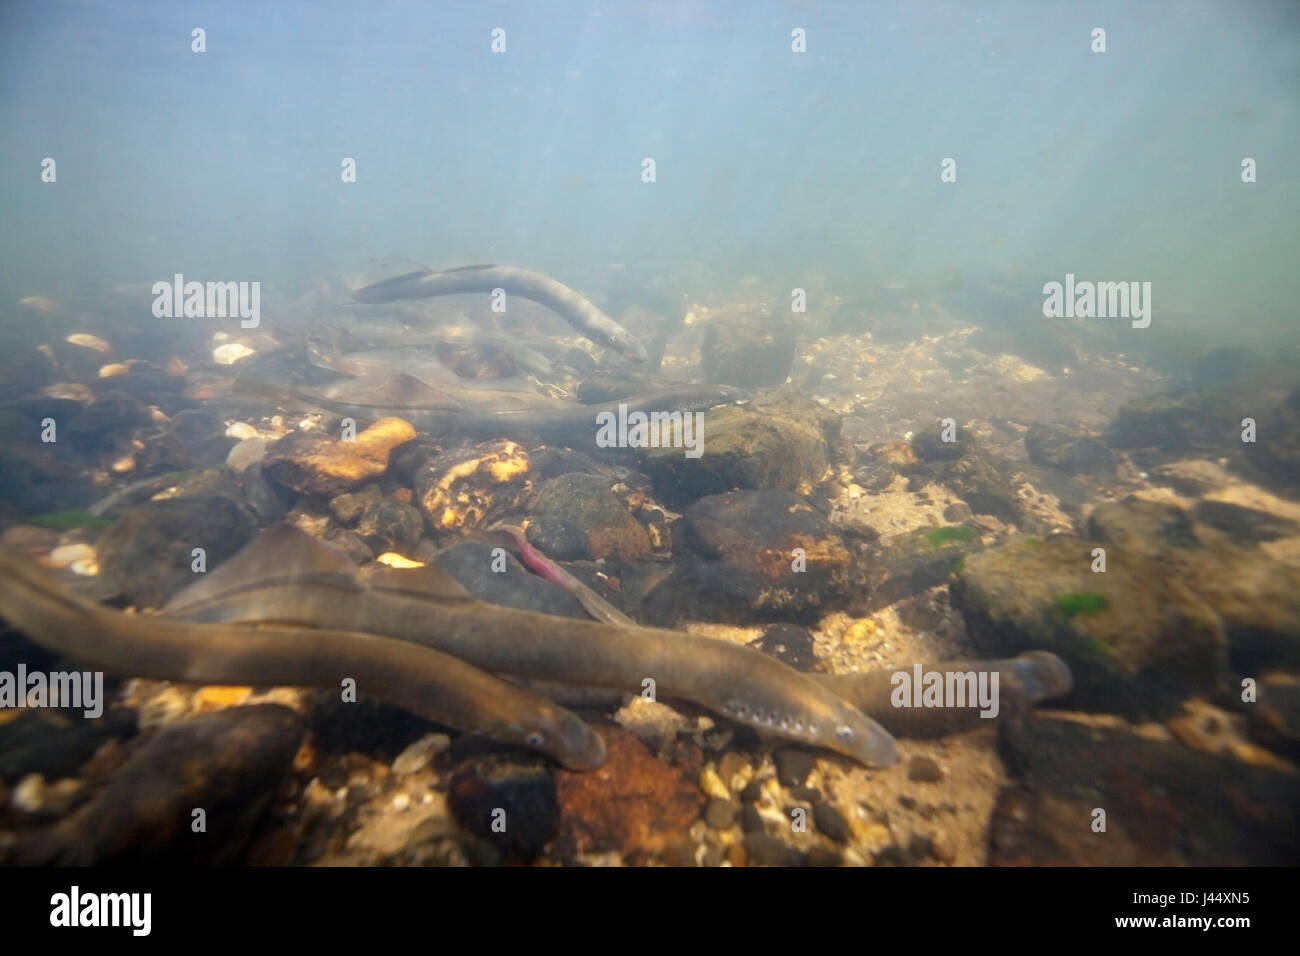 river lampreys on a spawning site in the Netherlands, the males make nestholes between the rocks were the females can lay their eggs. Stock Photo